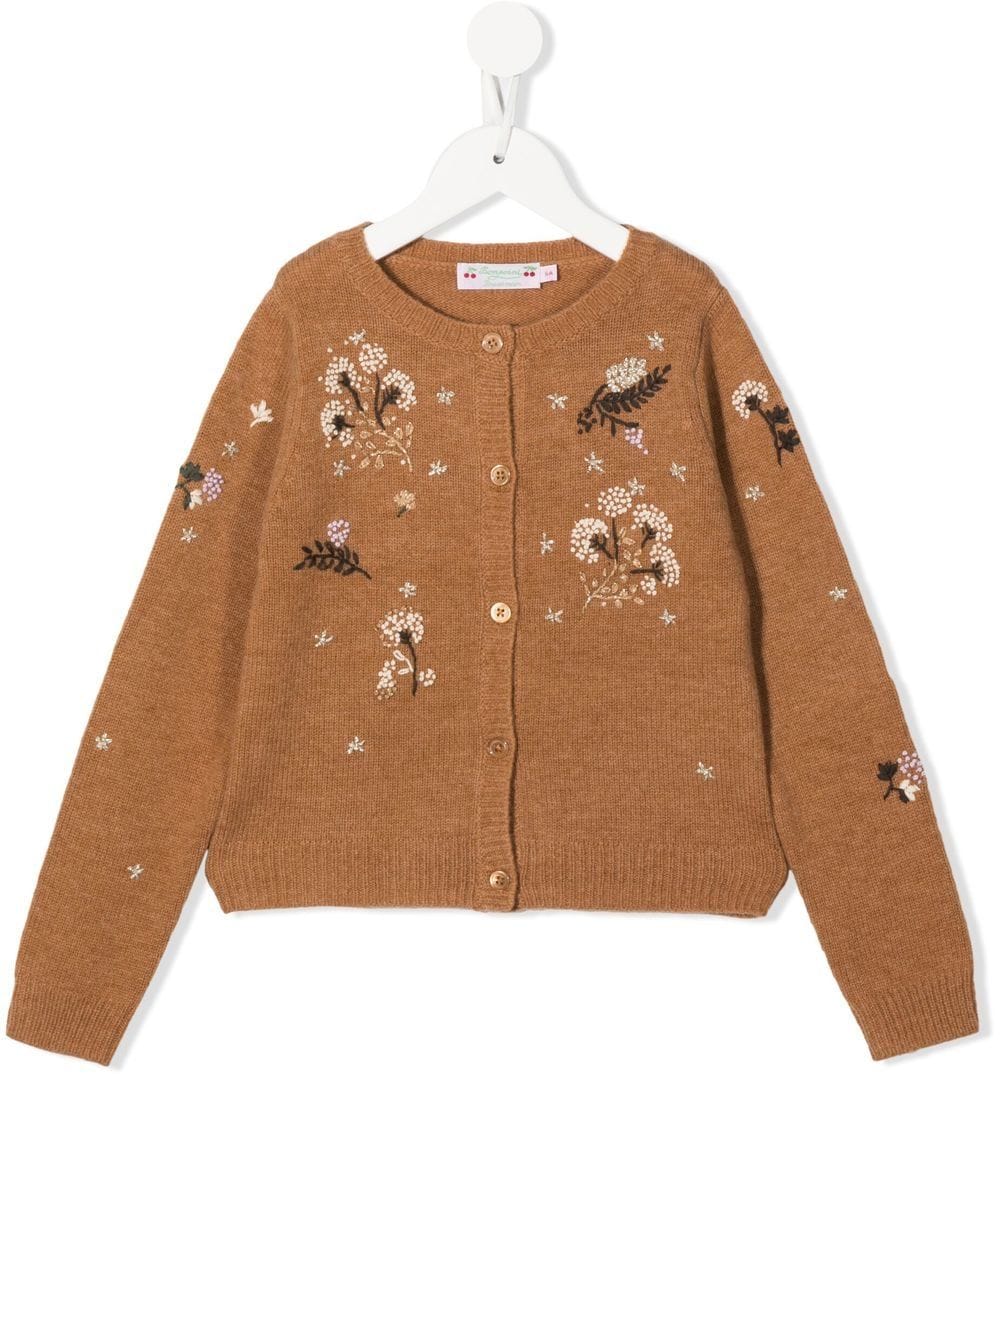 Bonpoint Toesie floral-embroidered Wool Cardigan - Farfetch